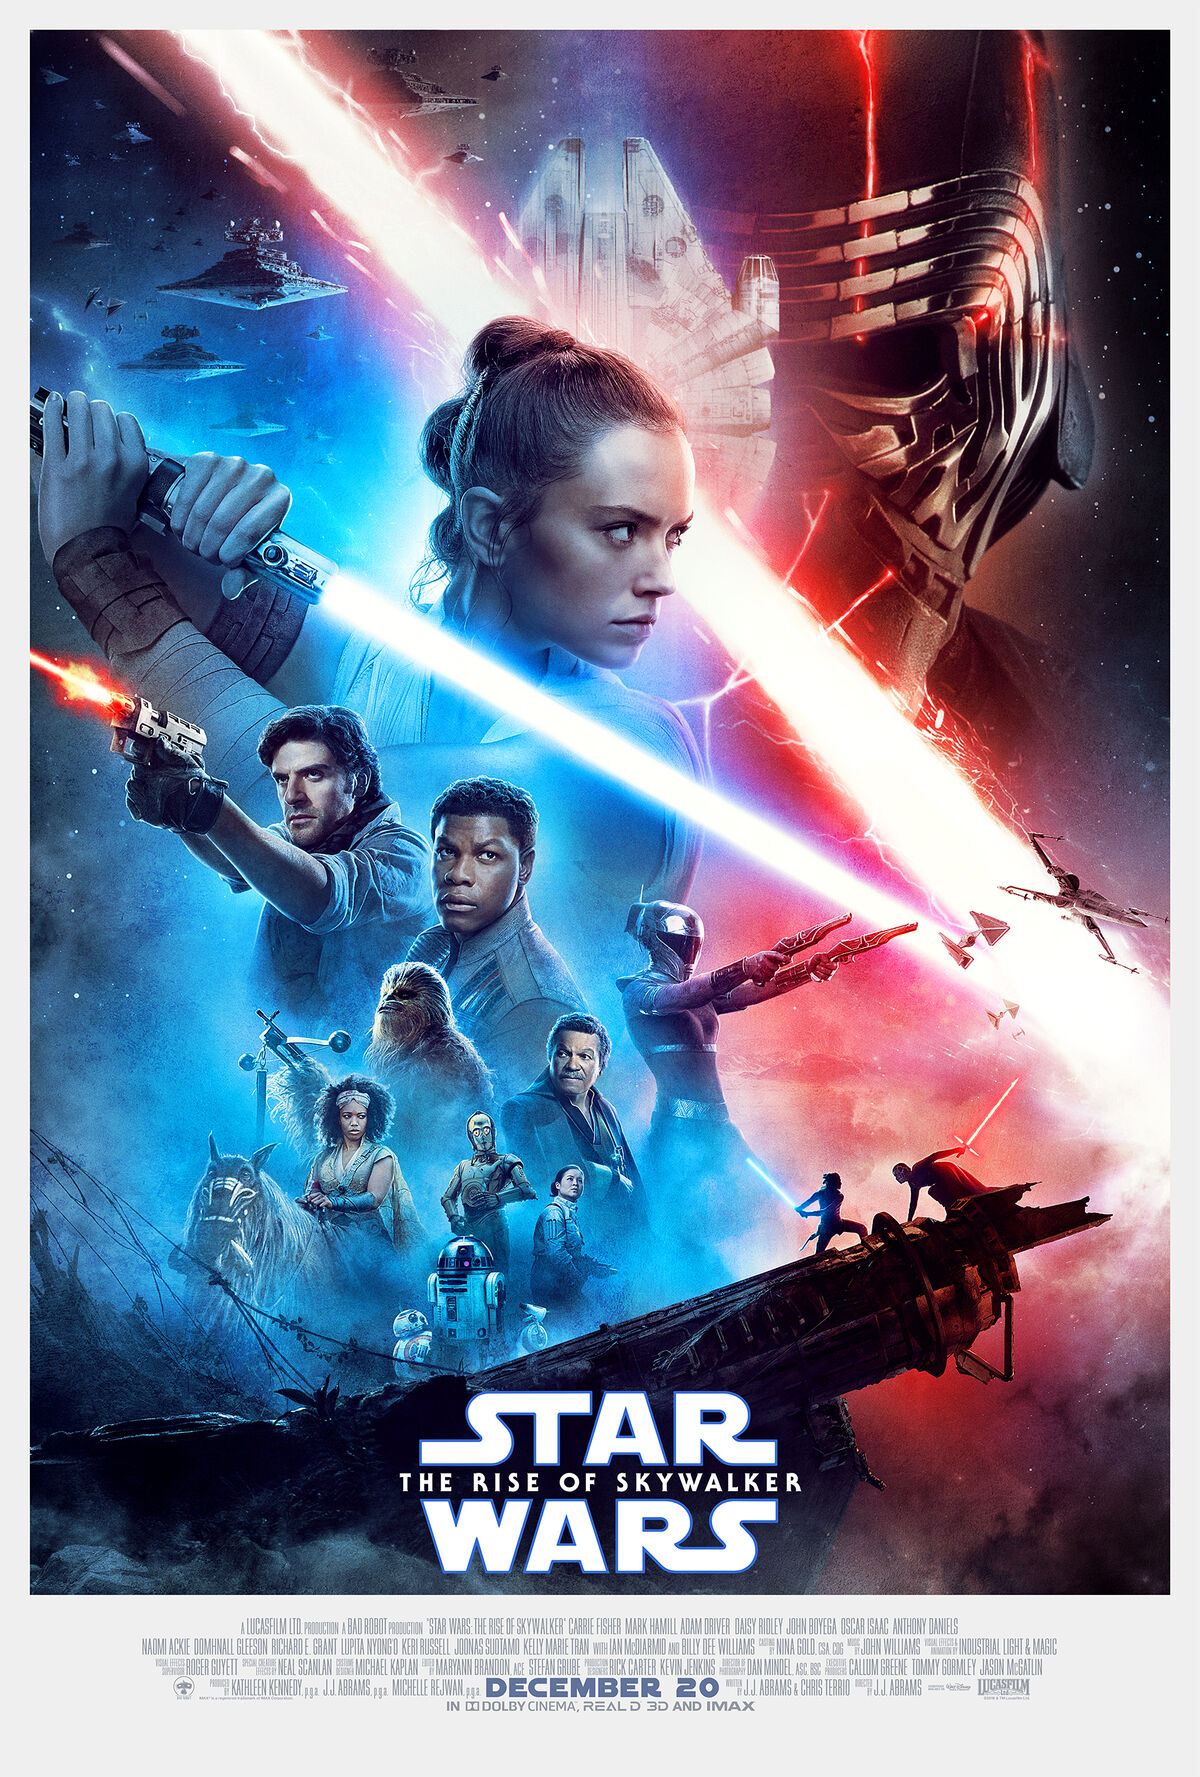 Movie Review: Star Wars- Rise of Skywalker - Fangirl Freakout